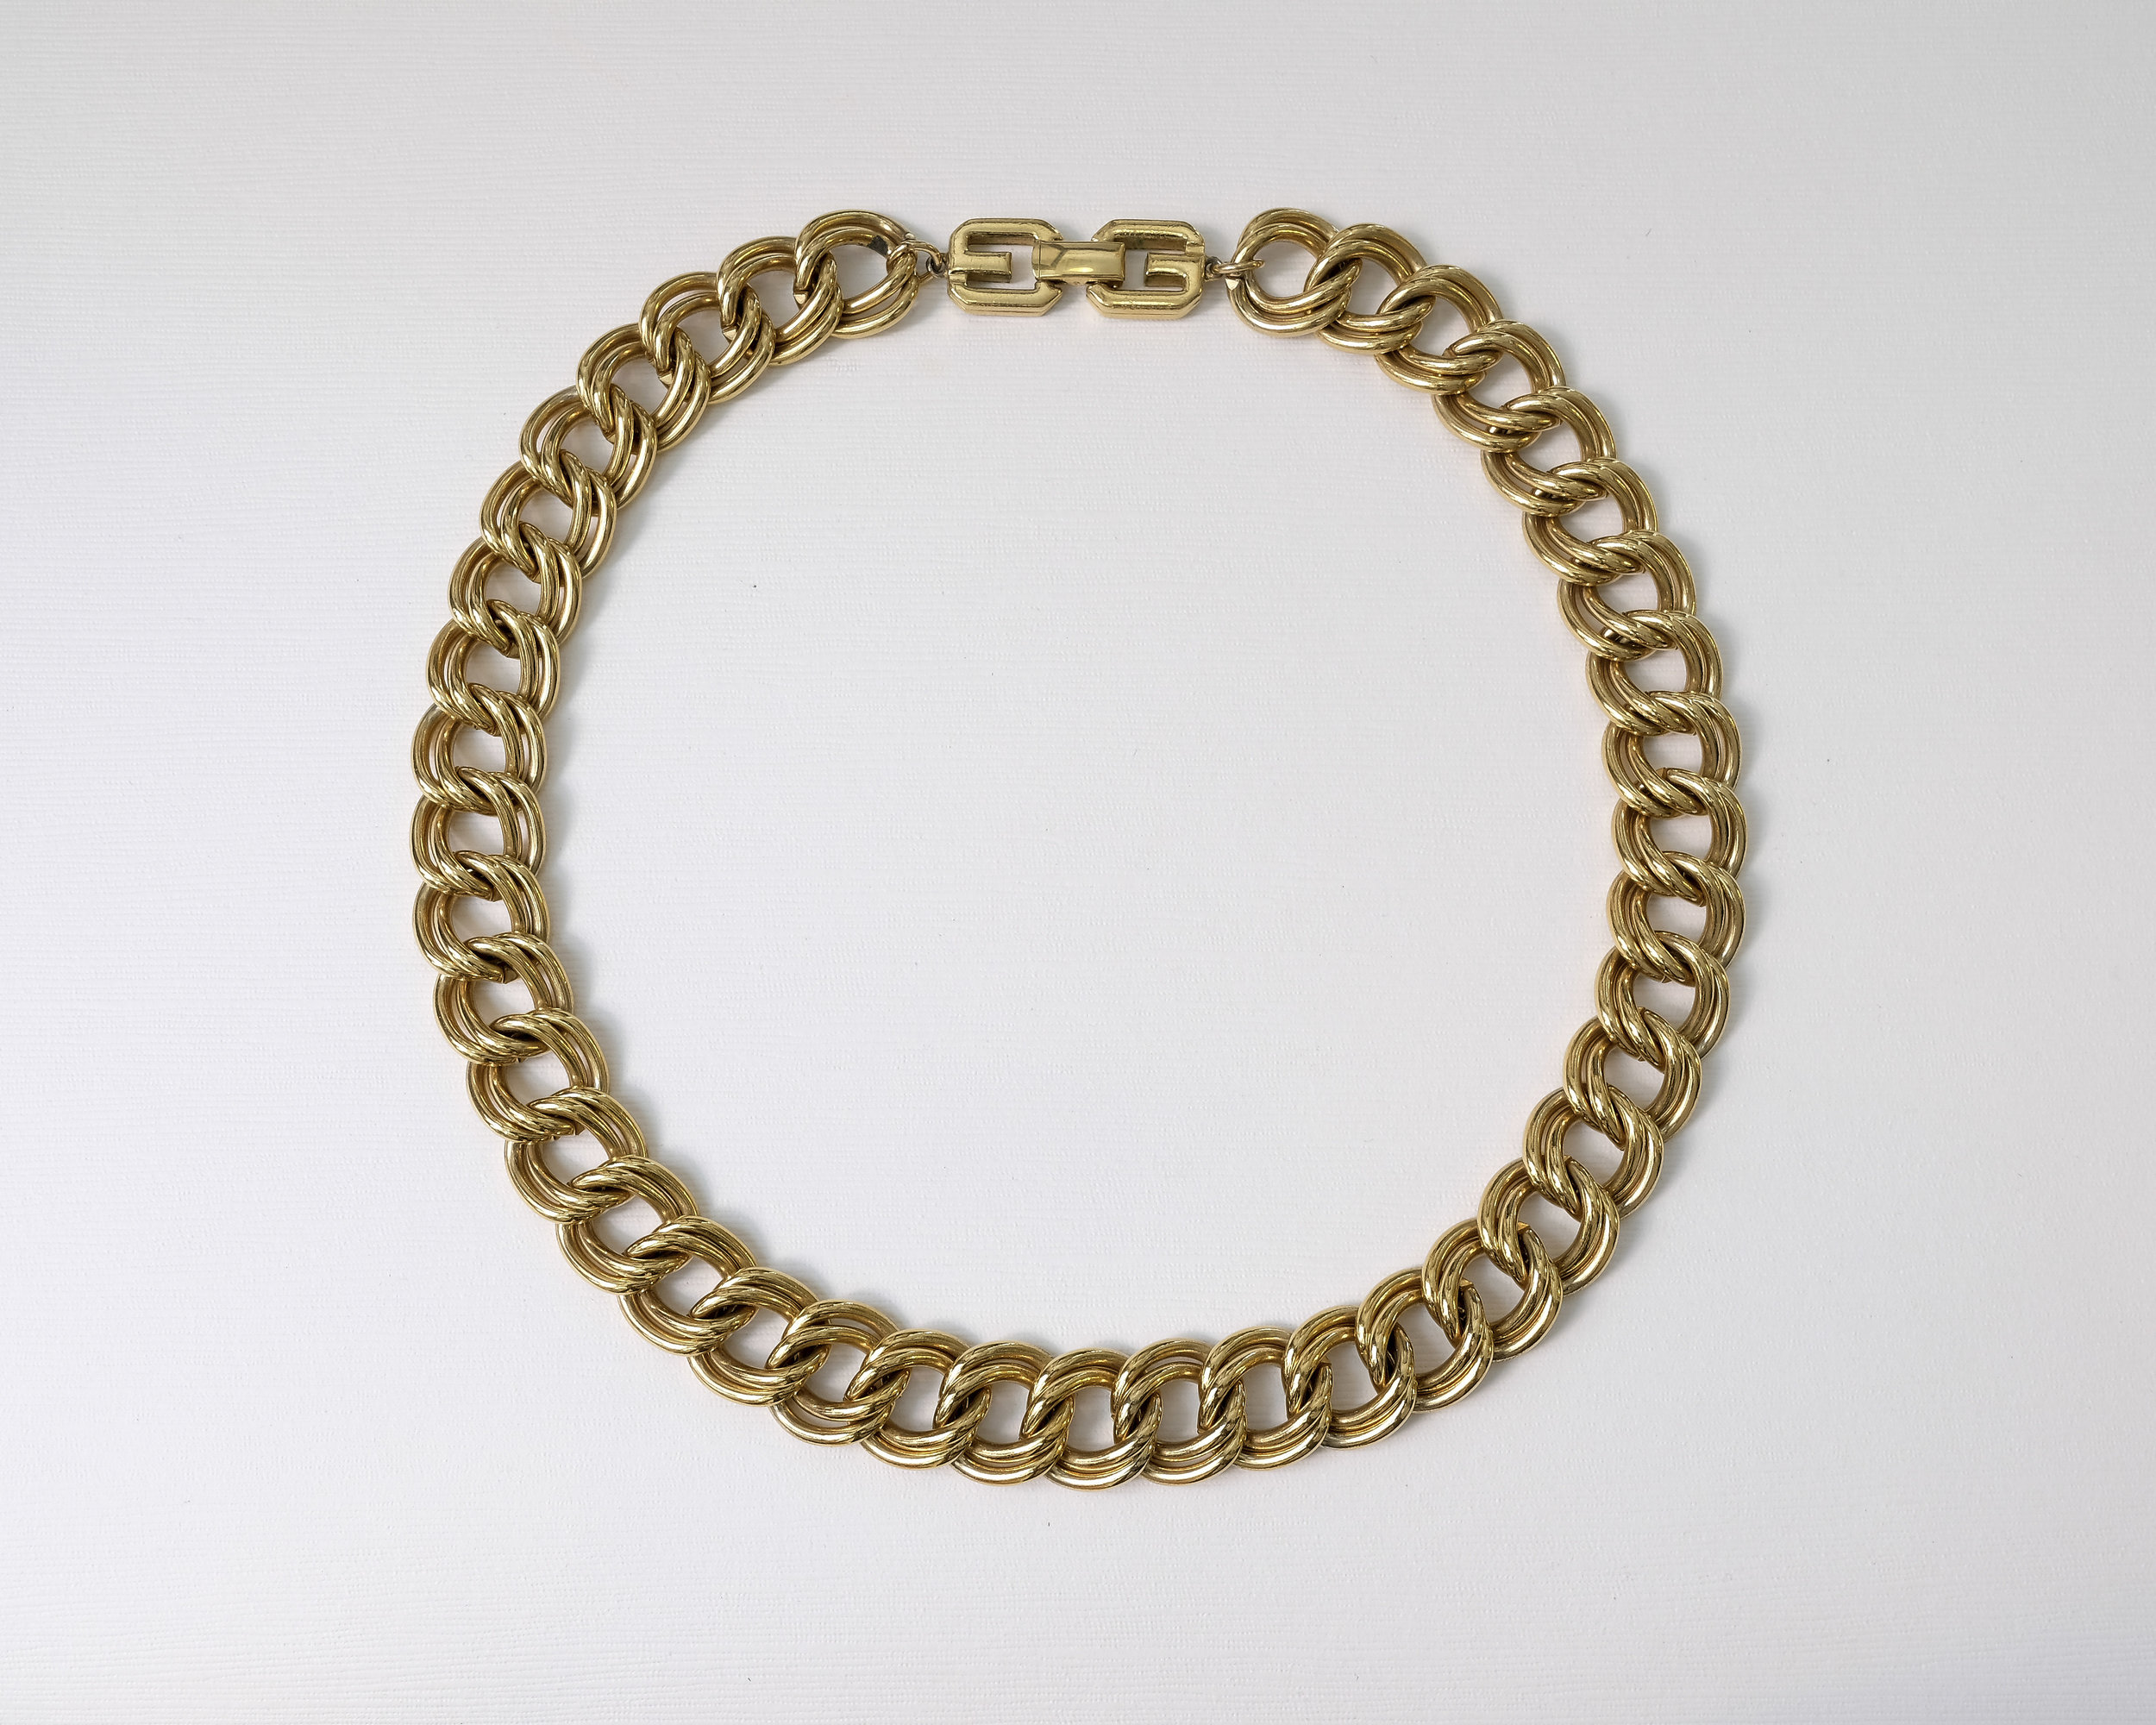 givenchy gold necklace